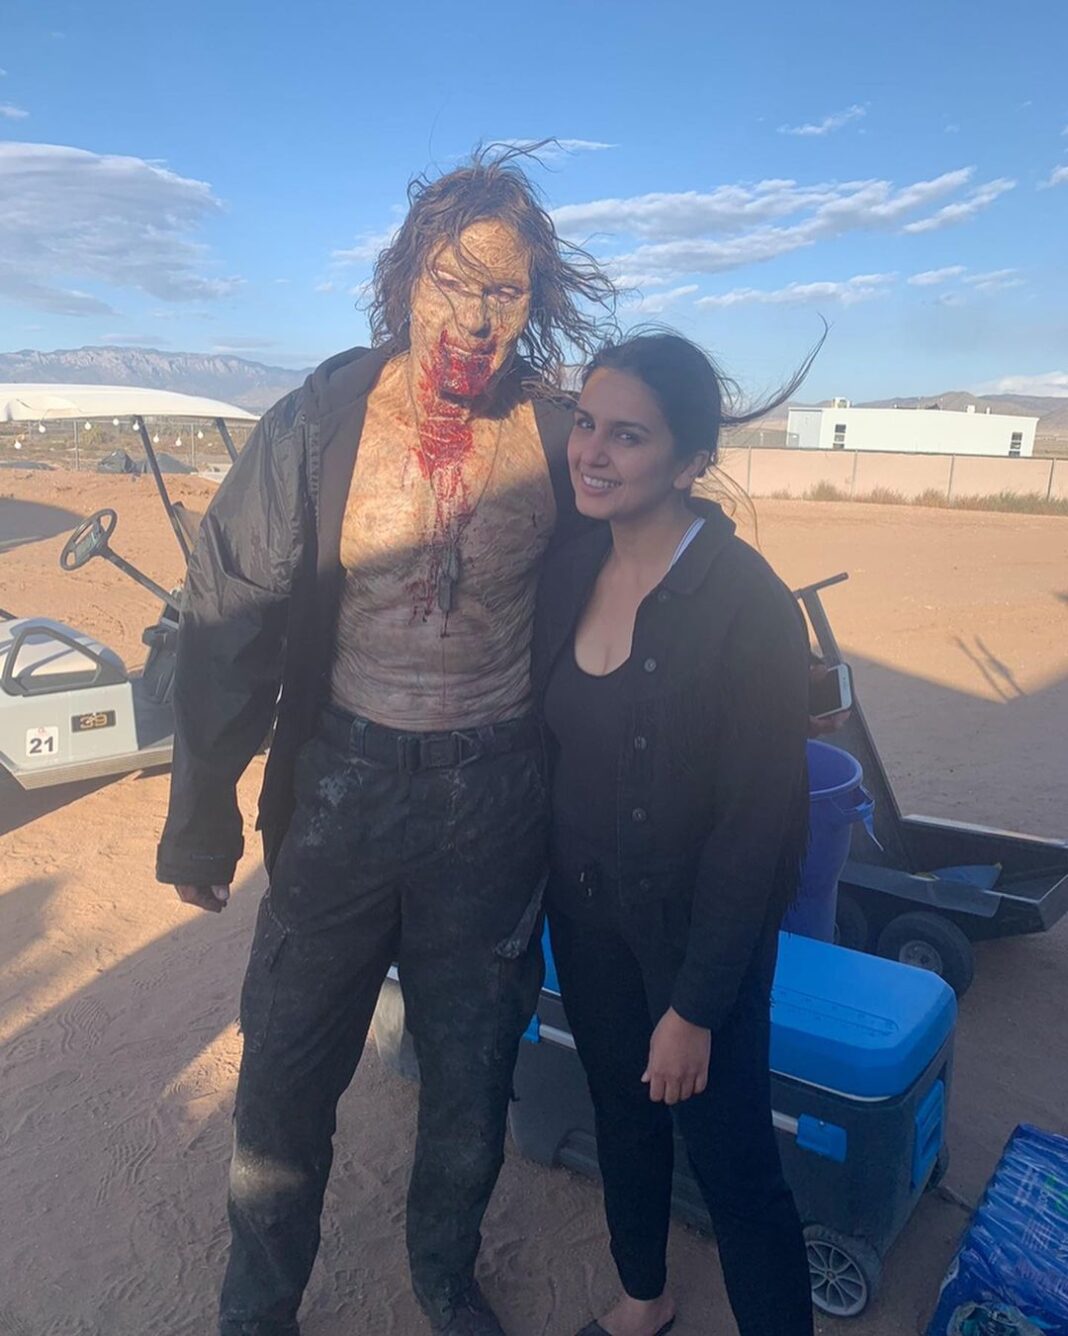 Huma Qureshi Instagram - Me and the super talented @stunt_batman aka Zombie King seen in happier times ... Slide to see me teaching him some scary moves 🤣🤣🤣 🧟‍♀️ 🧟 Chalo darra kar dikao sabko !!! Shabaash !! #shoot #tbs #armyofthedead #aotd #zombie #zombies #shootshenanigans #zacksnyder #scary